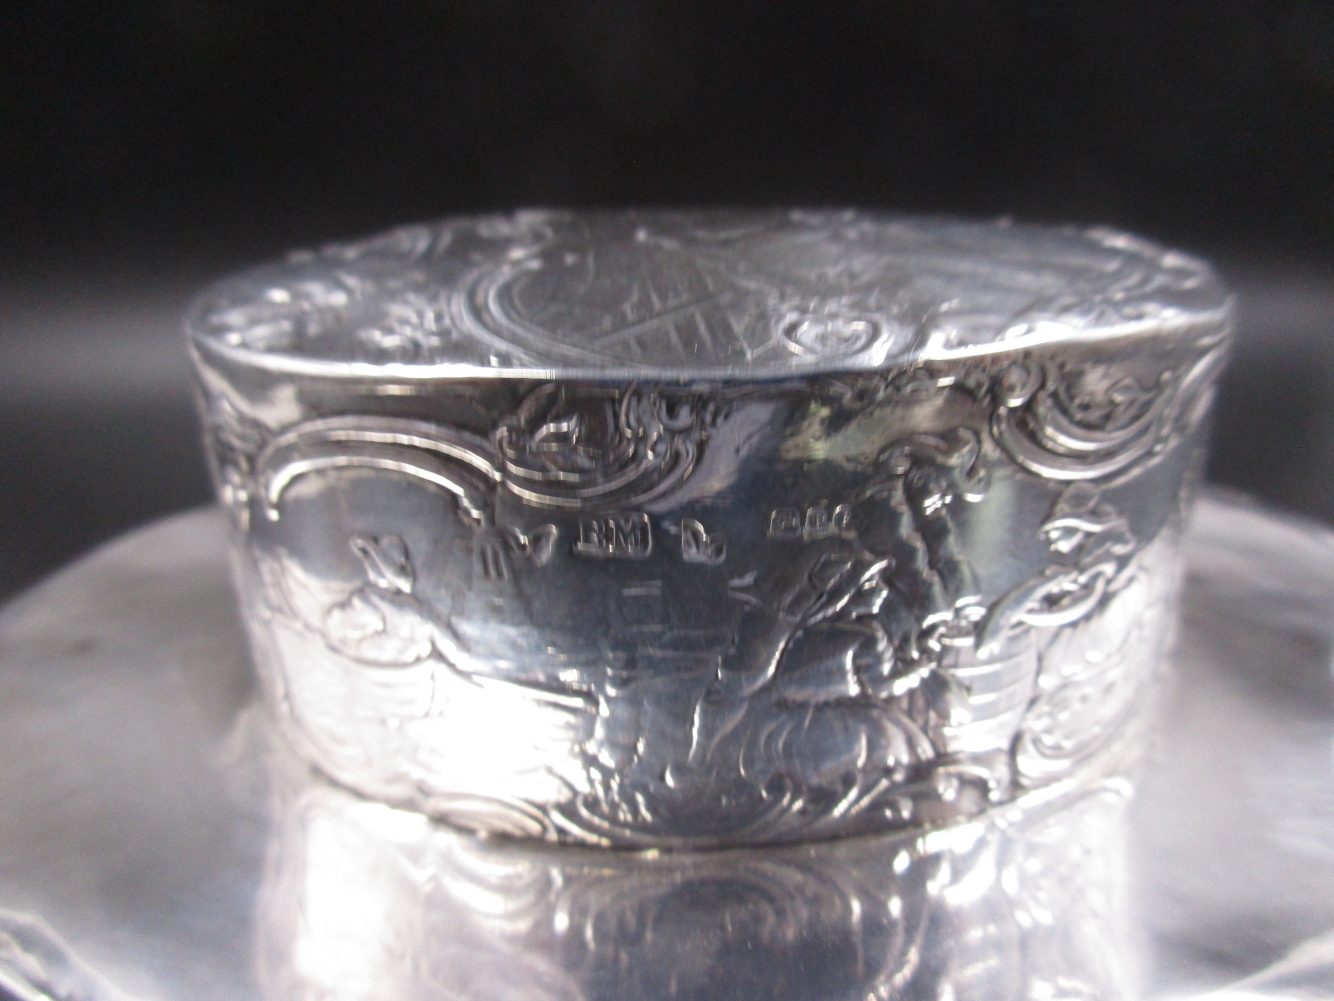 A VICTORIAN SILVER TEA CADDY WITH EMBOSSED SCENES DEPICTING 19th C. RURAL LIFE, DATED 1898 CHESTER - Image 2 of 3